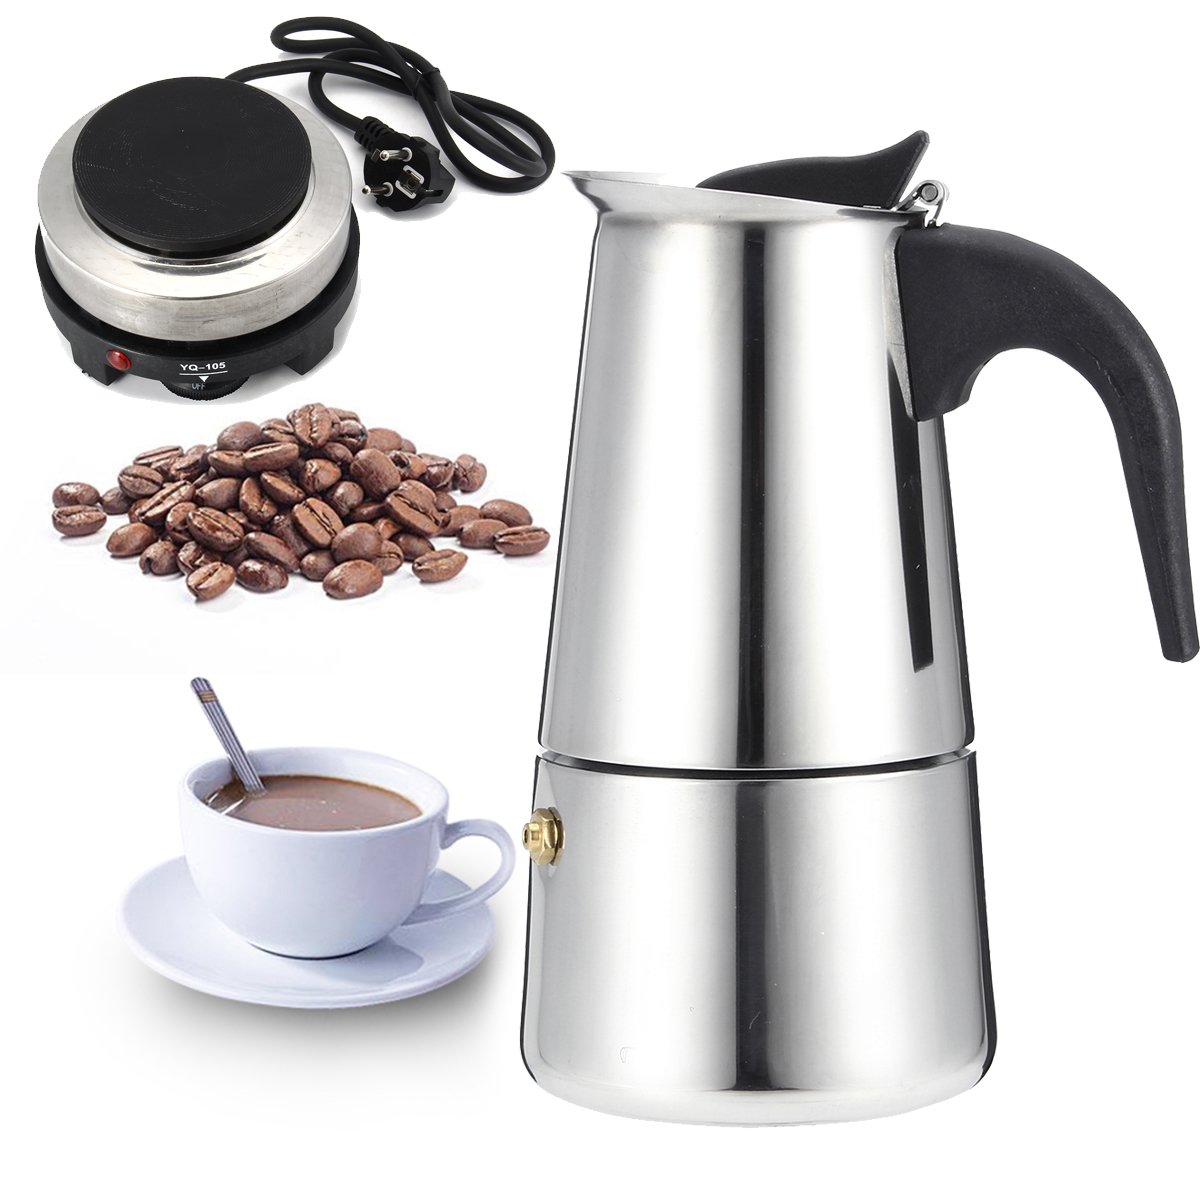 Espresso Moka Coffee Maker Pot Percolator Stainless Steel Electric Stove Electric Coffee Kettle 2